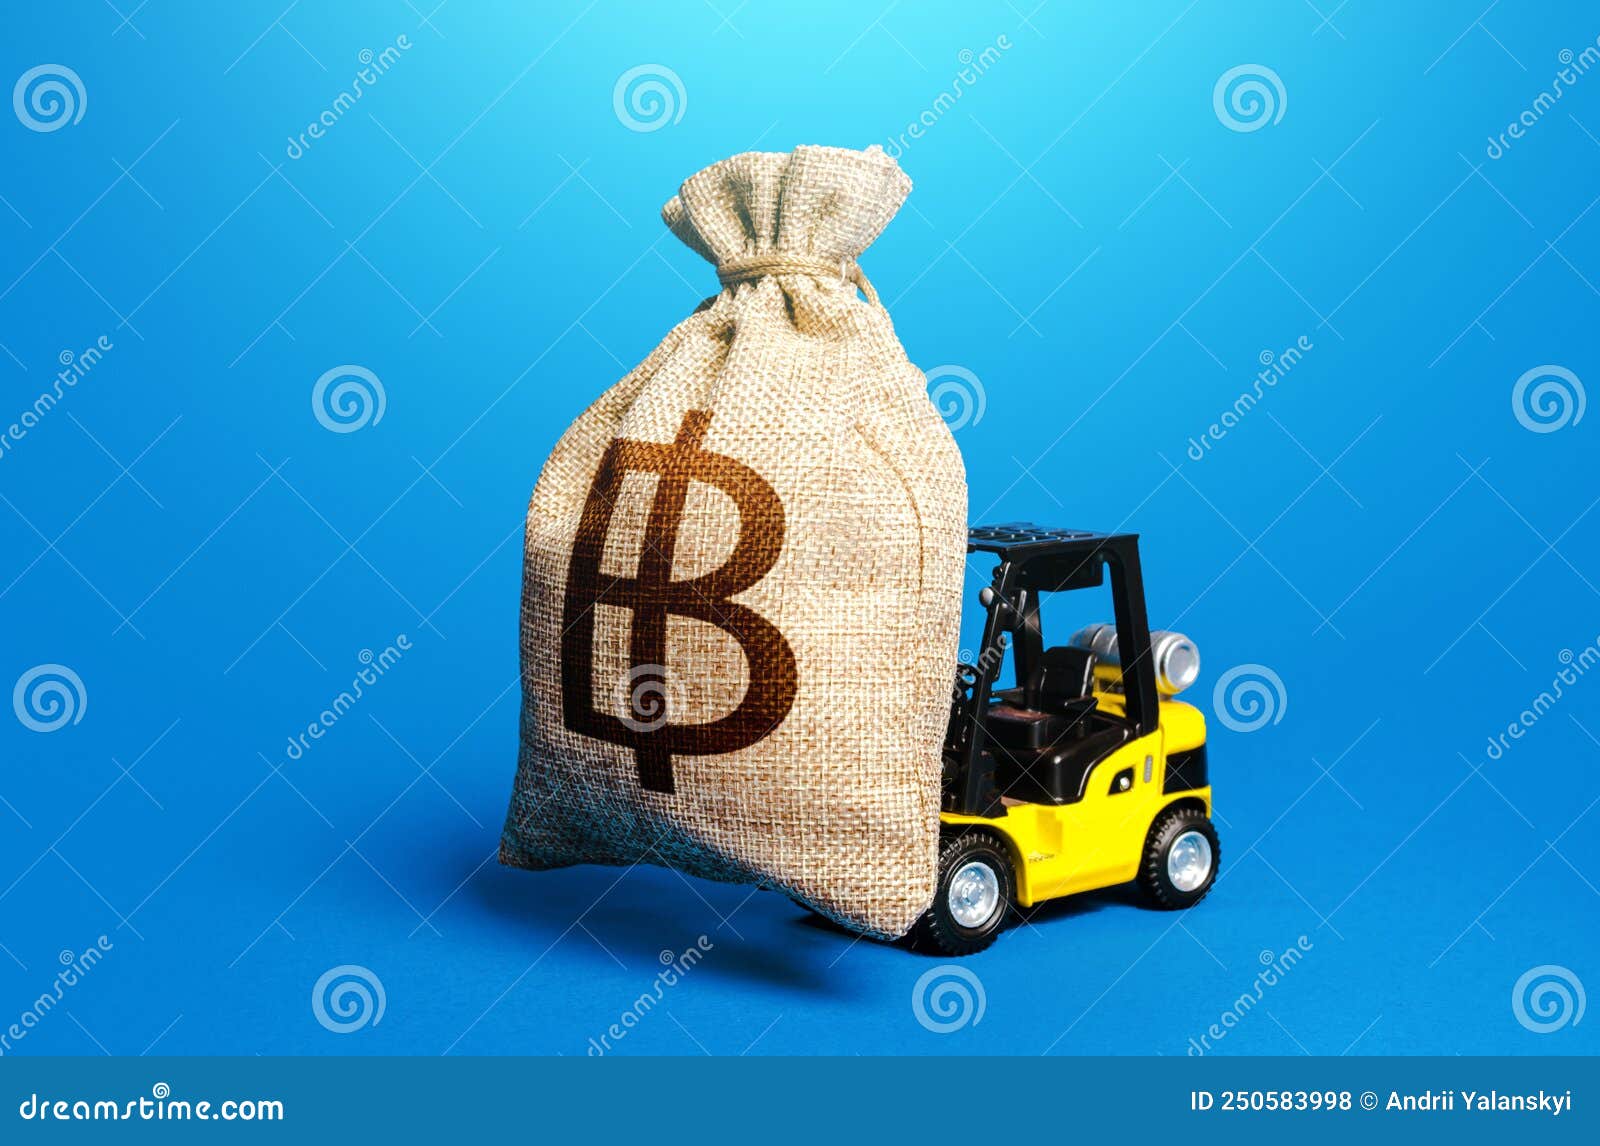 A Forklift Carrying a Thai Baht Money Bag Borrowing on Capital Market  Strong Financial Assistance Business Support Stock Photo  Image of  lending capital 250583998